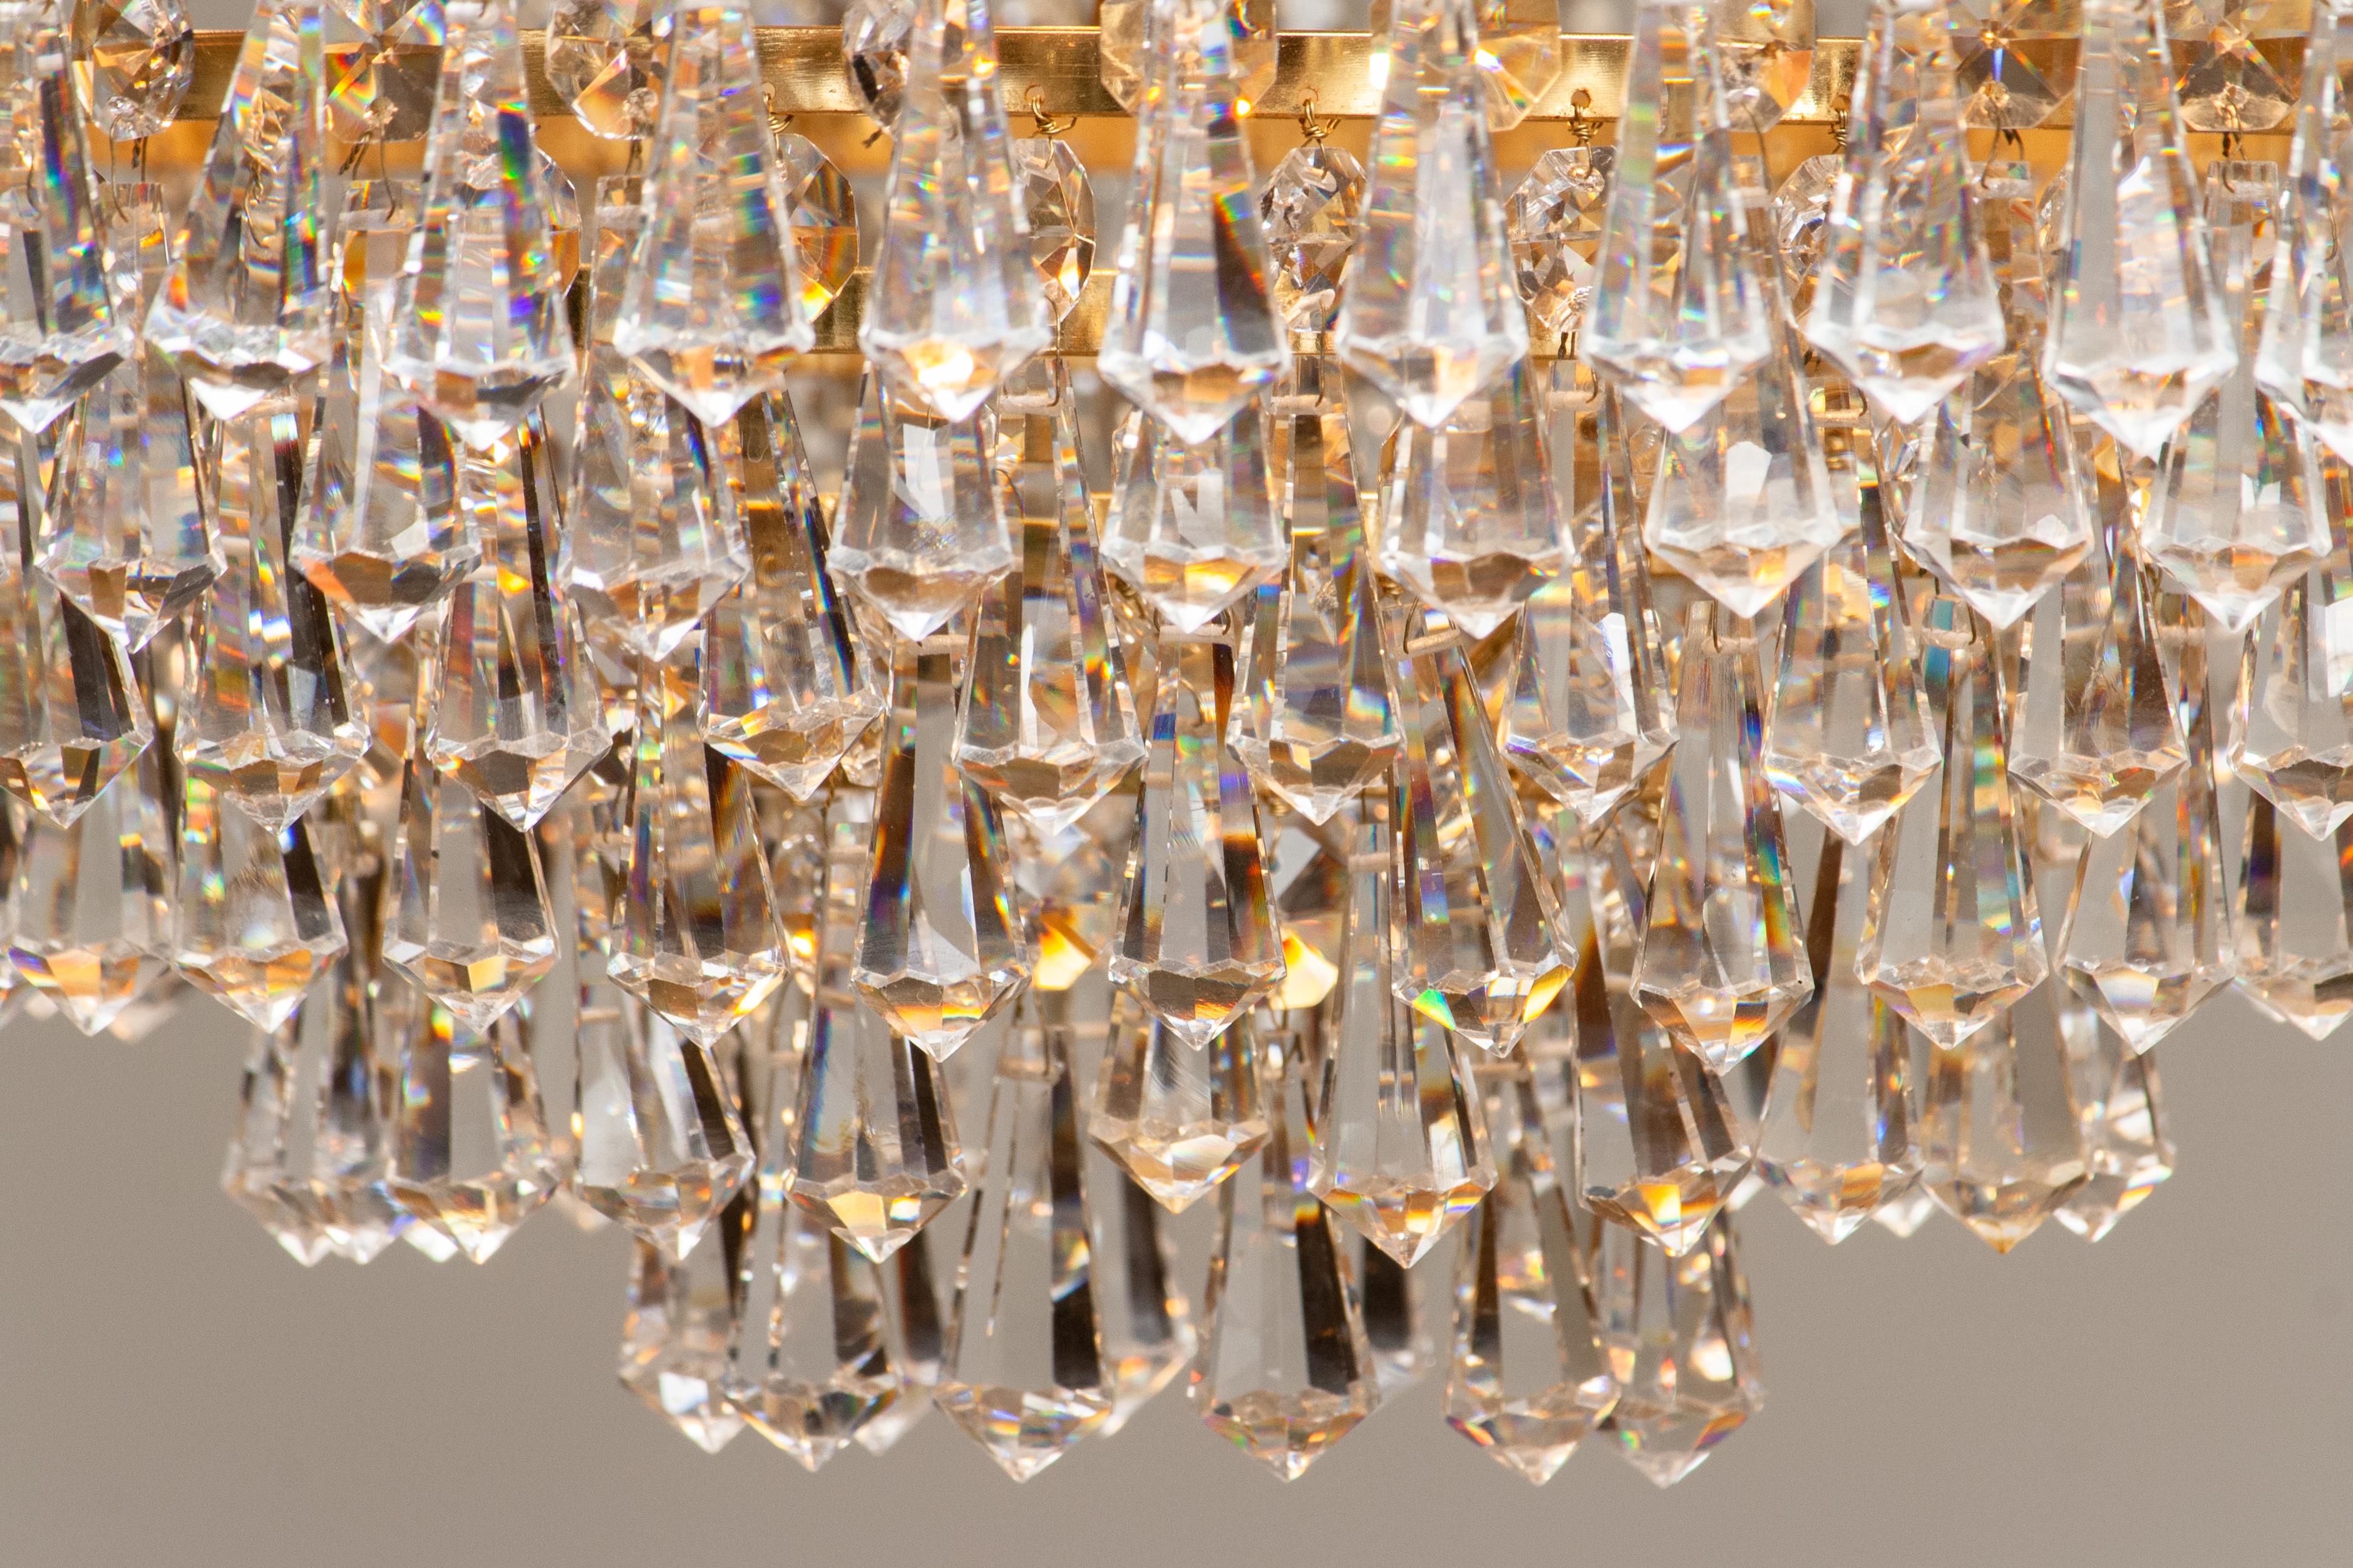 Mid-20th Century 1960s, 24-Carat Gold-Plated and Faceted Crystal Chandelier by Rejmyre, Sweden